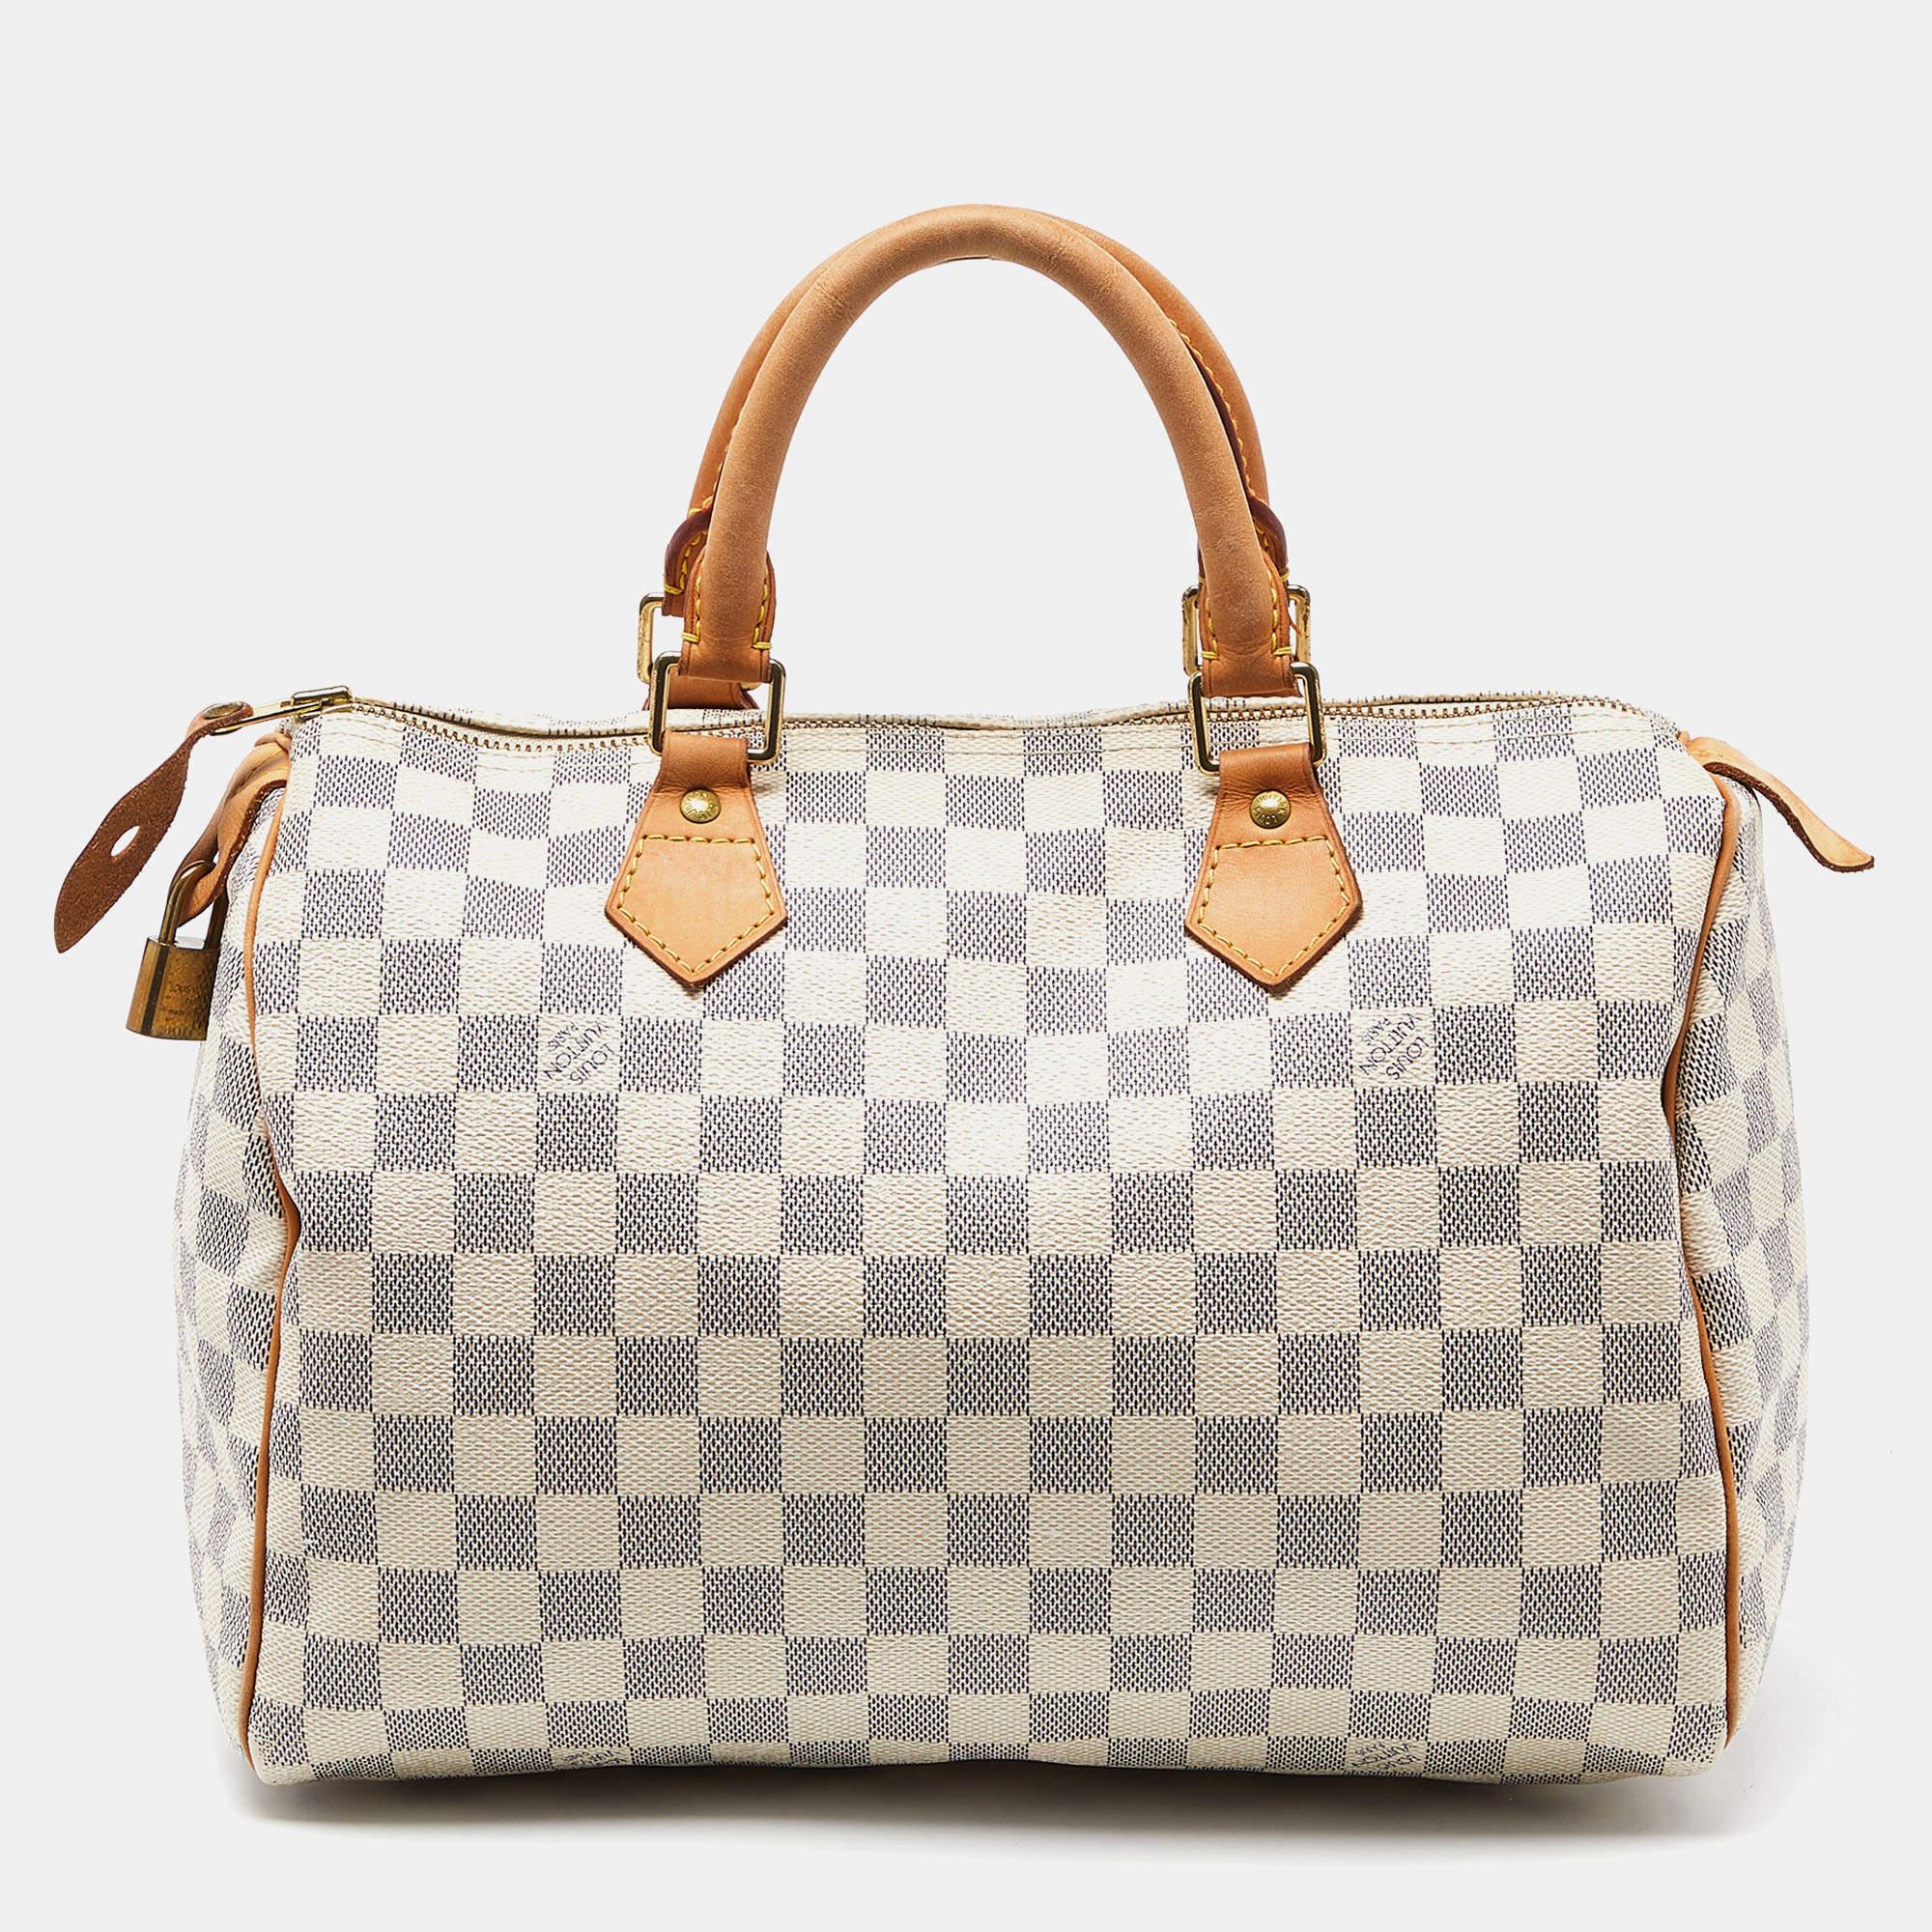 Louis Vuitton's handbags are popular owing to their high style and functionality. This bag, like all their designs, is durable and stylish. Exuding a fine finish, the LV Damier Azur Speedy 30 bag is designed to give a luxurious experience. The